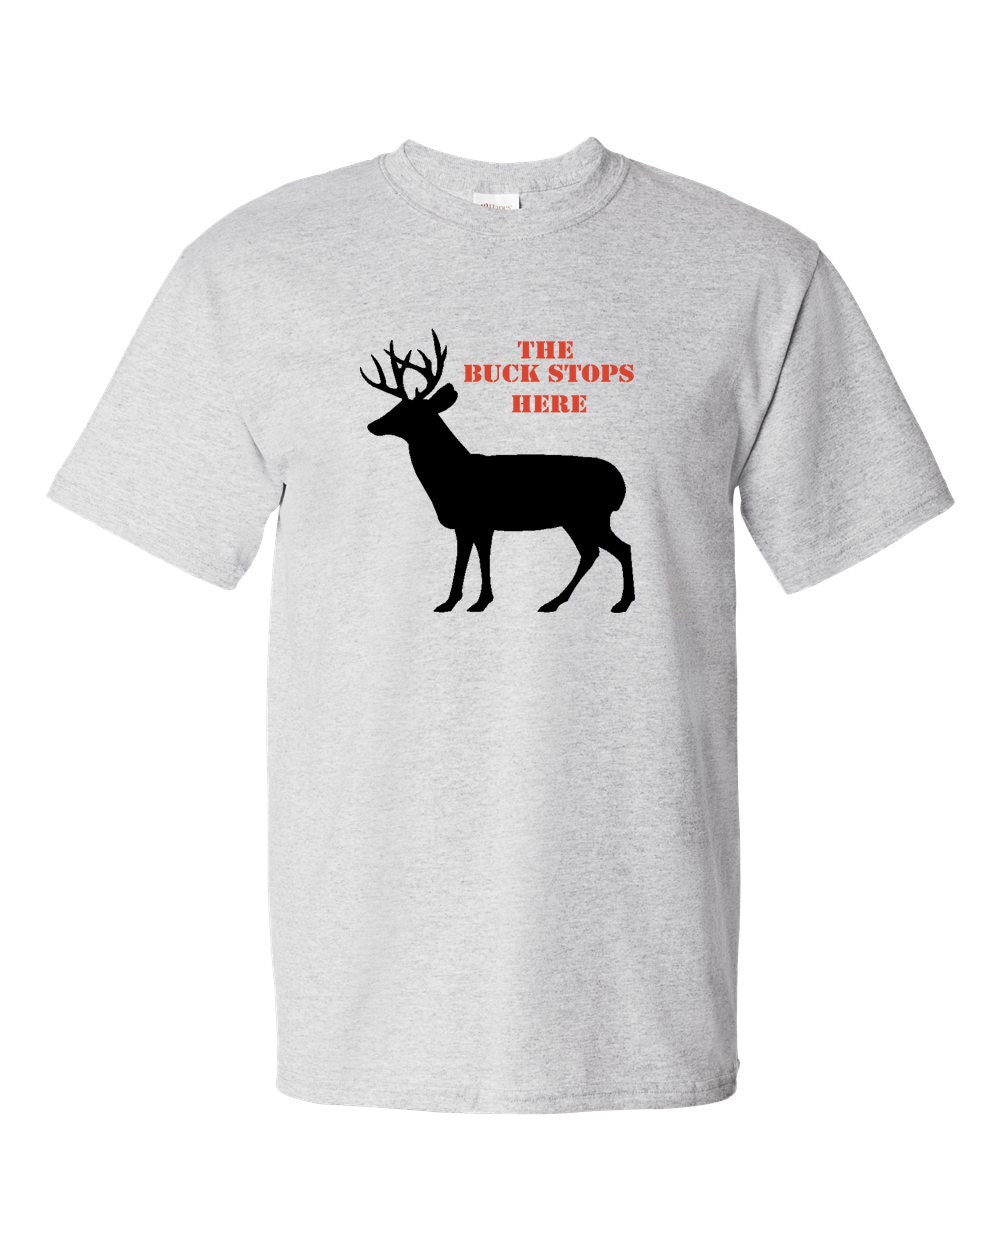 The Buck Stops Here T-Shirt TShirts Hunting T-Shirt For